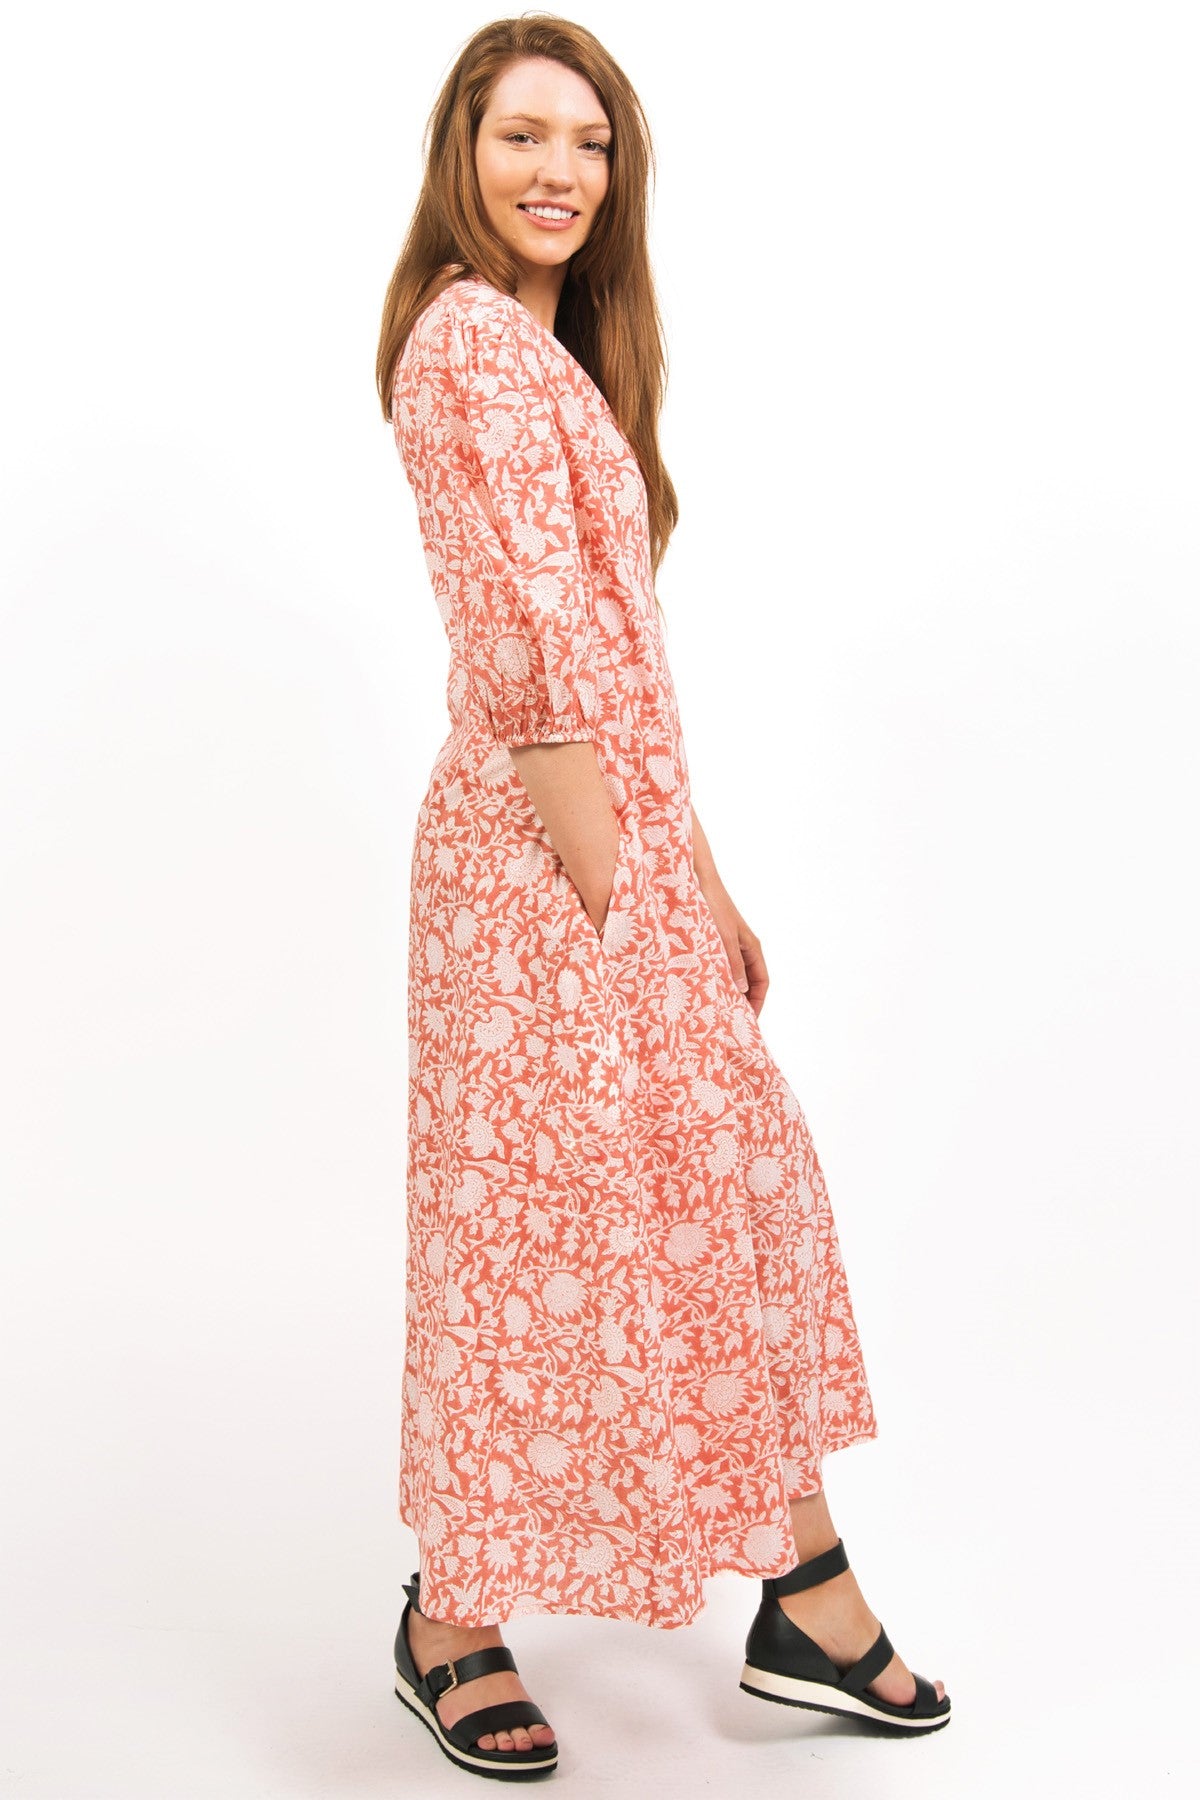 ZEPHYR PRINTED WRAP MAXI DRESS - IN PEACHY FAWN COLOUR-zohaonline